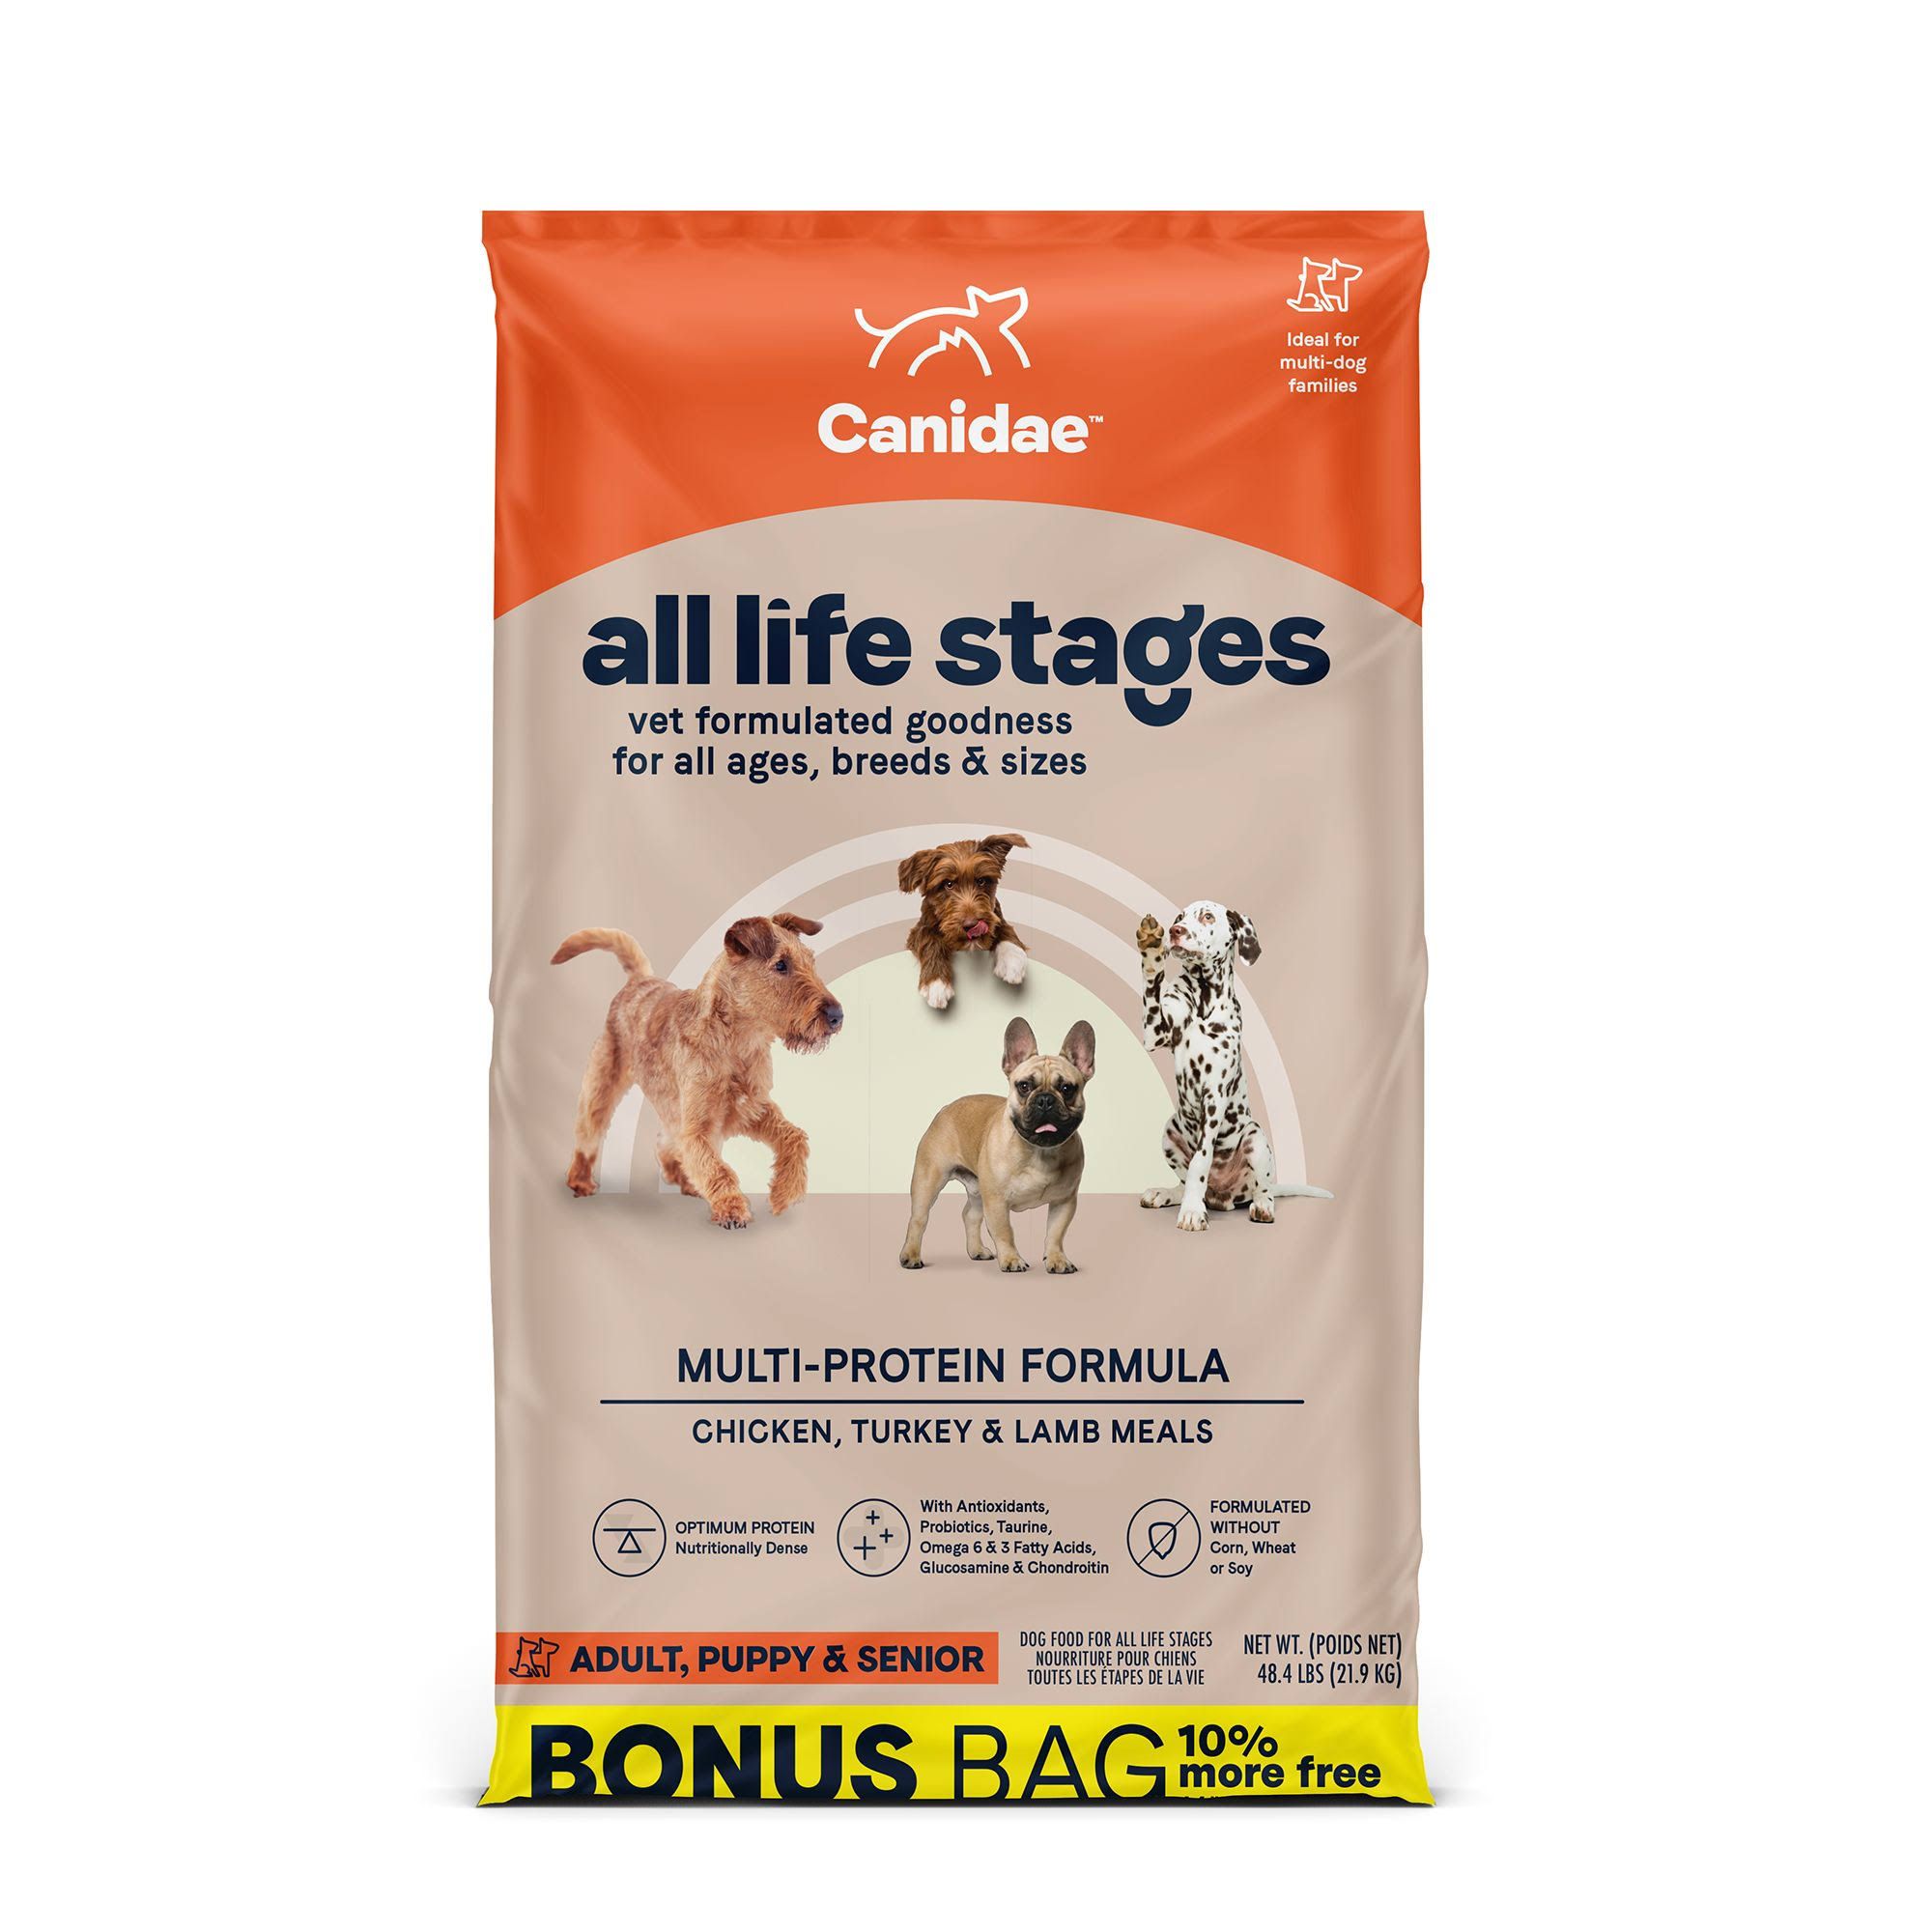 Canidae All Life Stages Multi-Protein Formula Chicken & Turkey Dry Dog Food, 48.4 lbs.